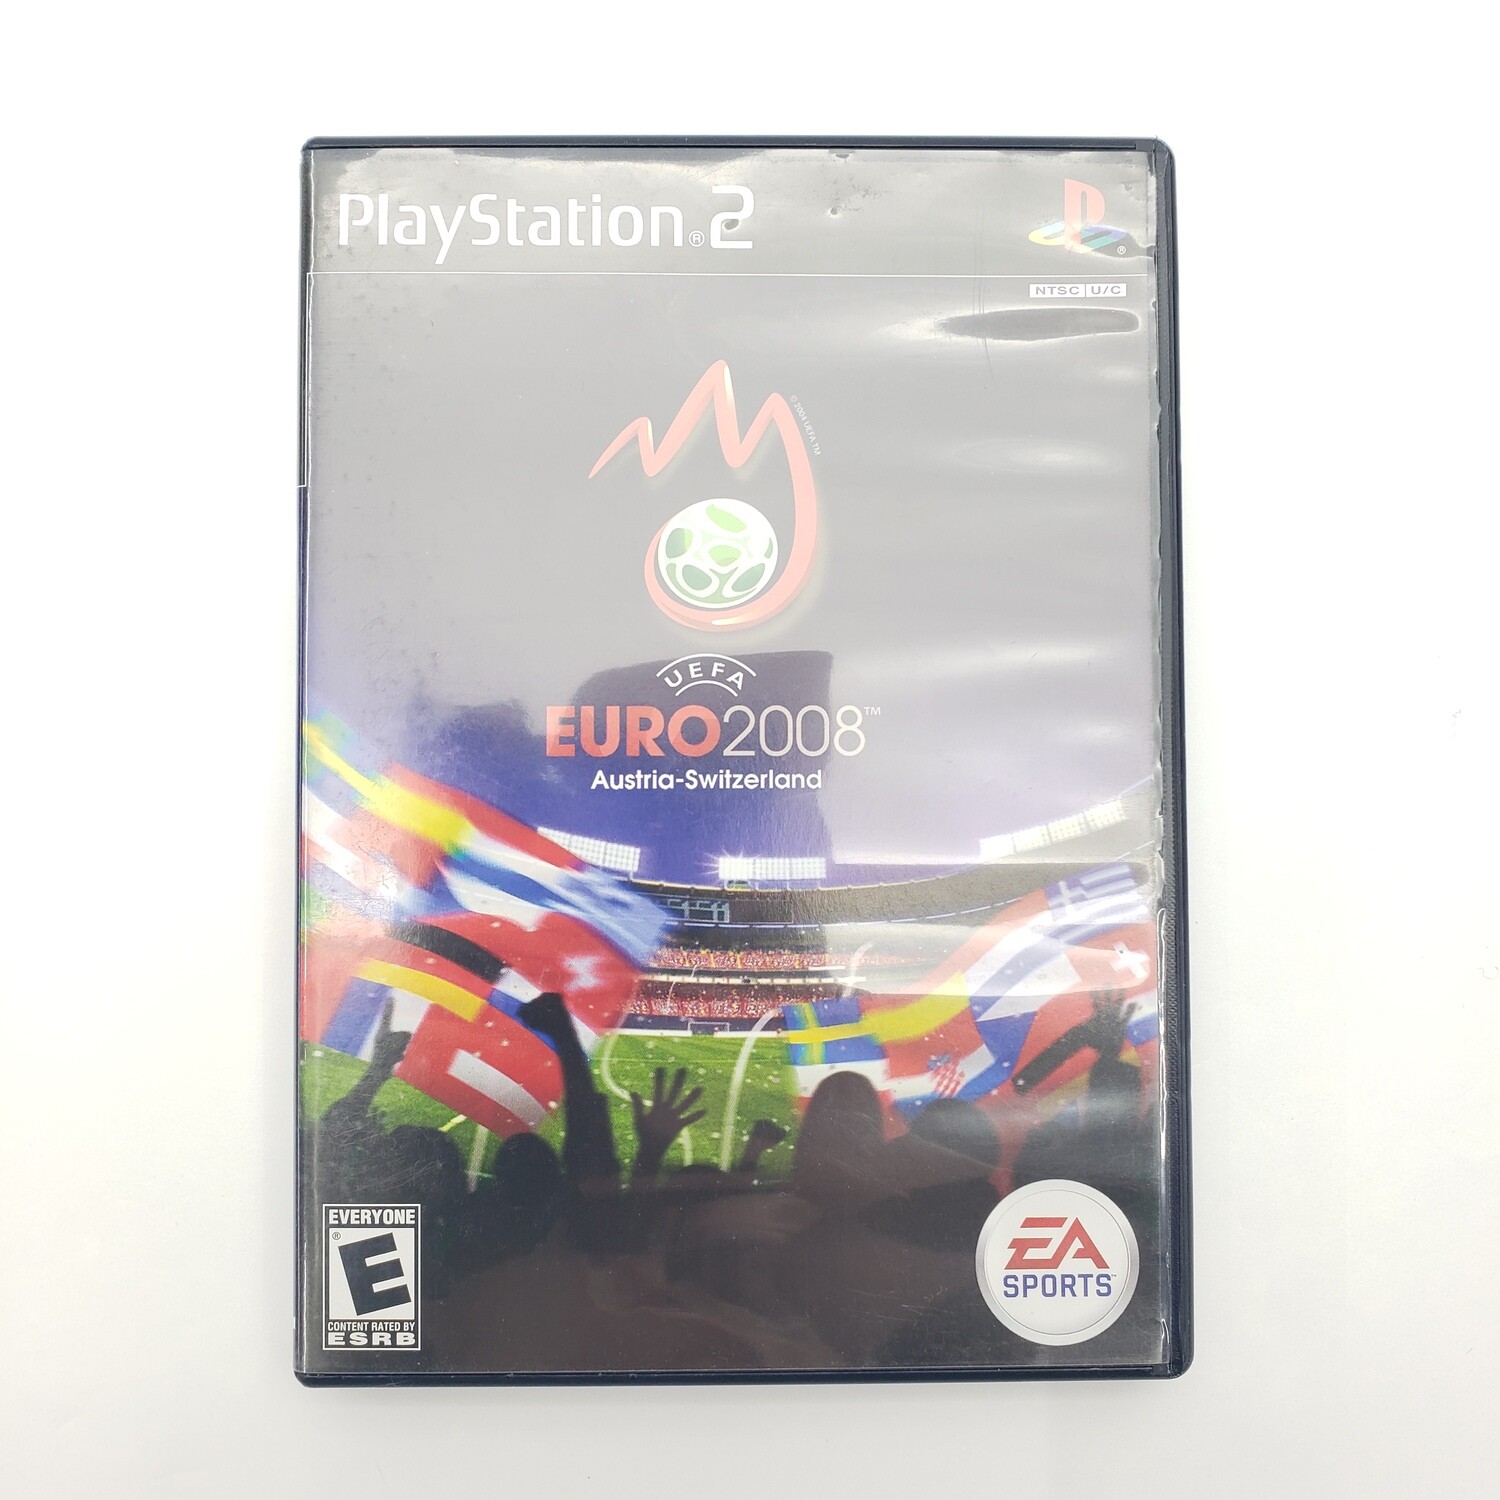 UEFA Euro 2008 Video Game for PS2 - Used